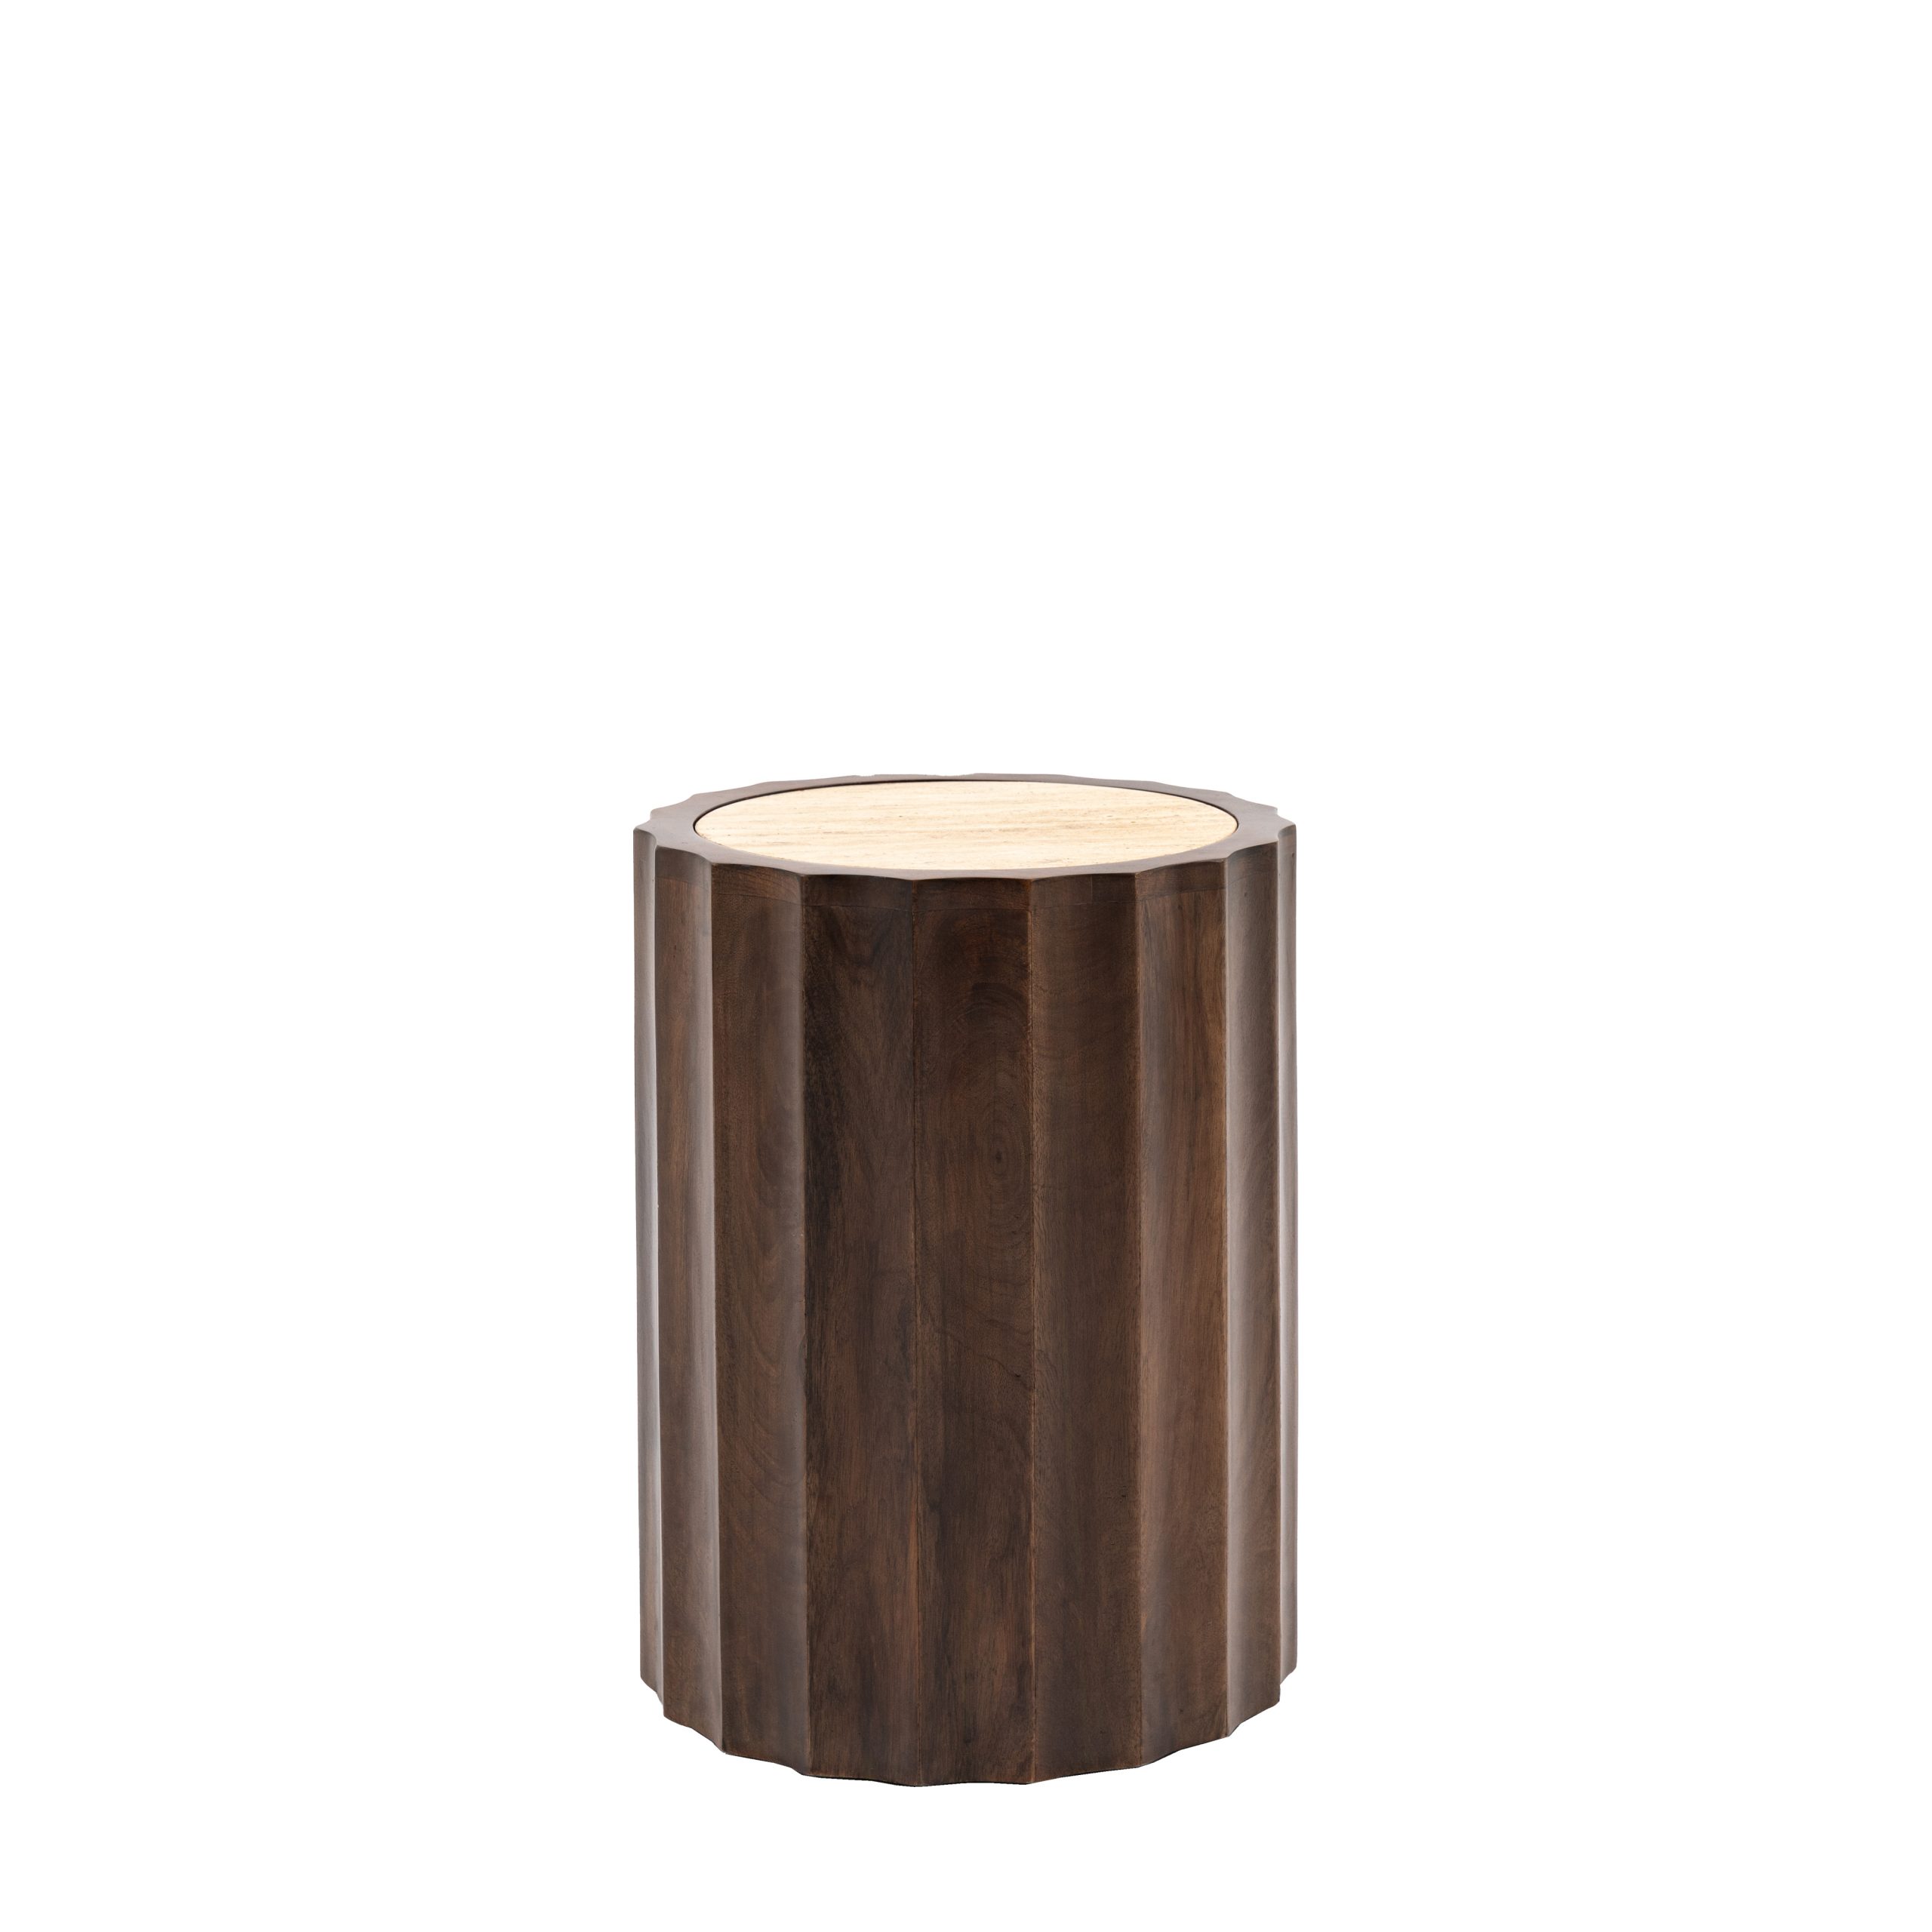 Gallery Direct Cascia Side Table